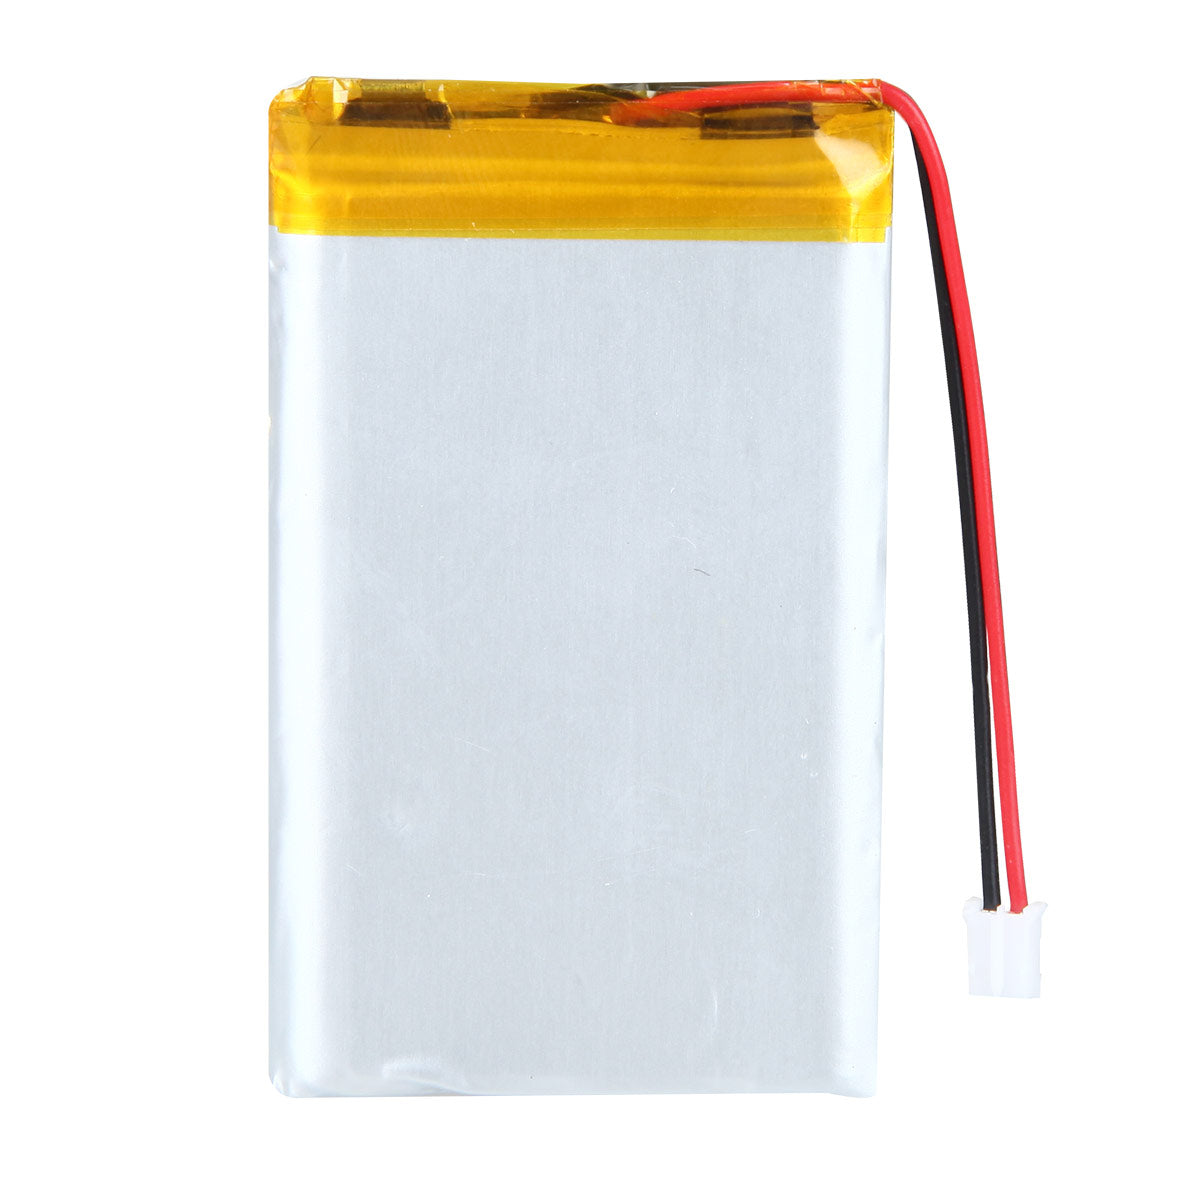 YDL 3.7V 2200mAh 903462 Rechargeable Lithium Polymer Battery